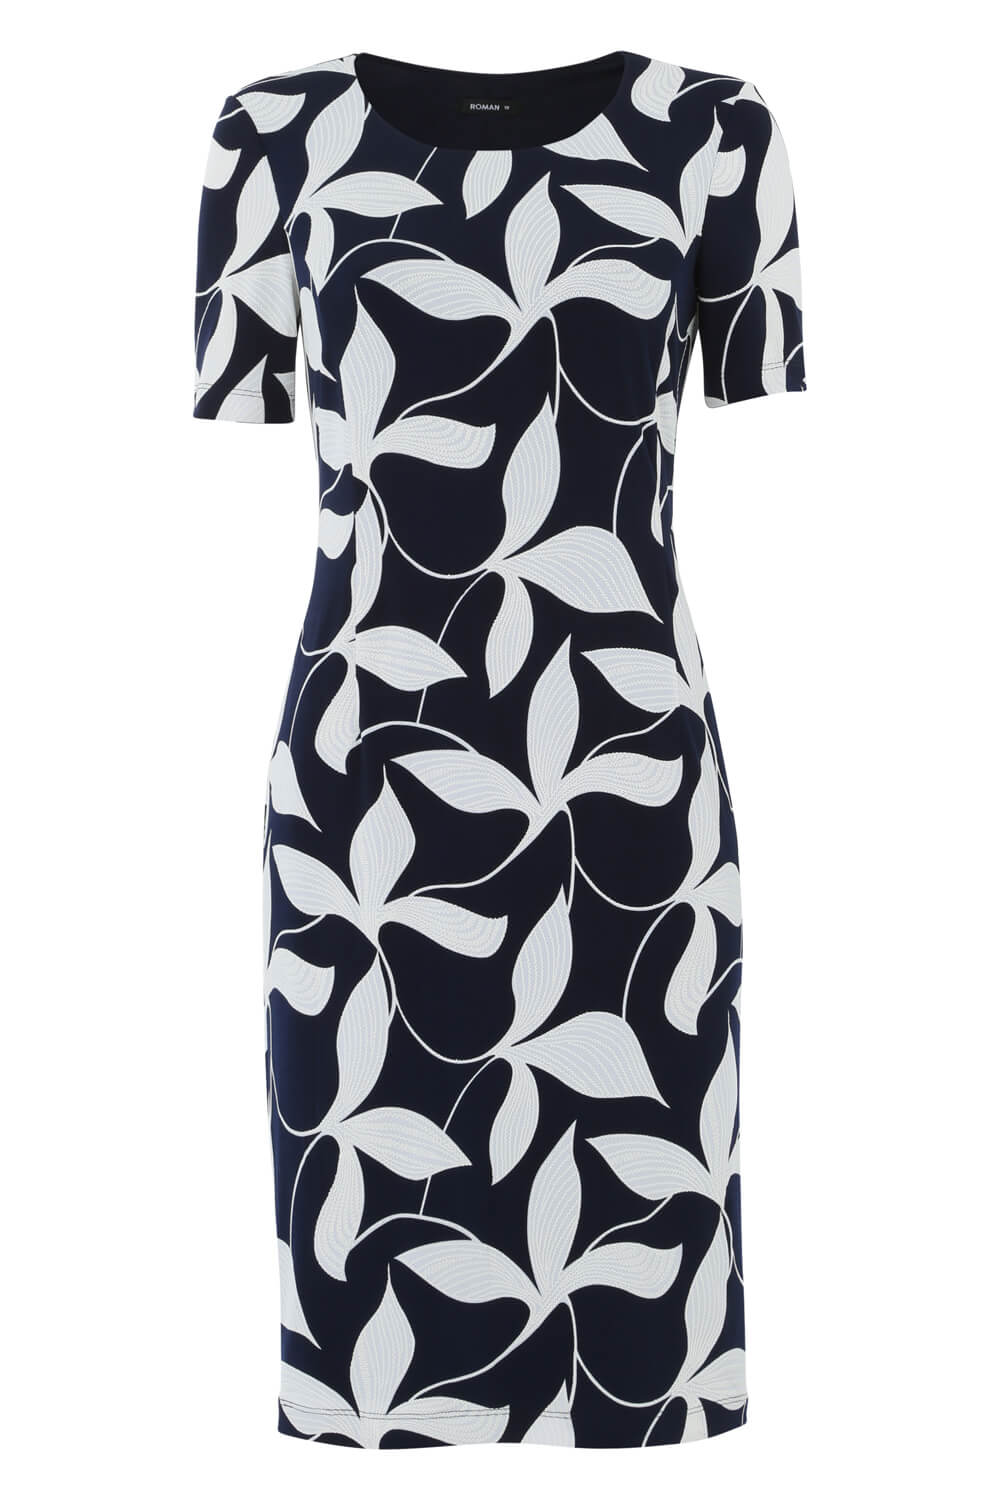  Abstract Leaf Textured Print Shift Dress, Image 5 of 5